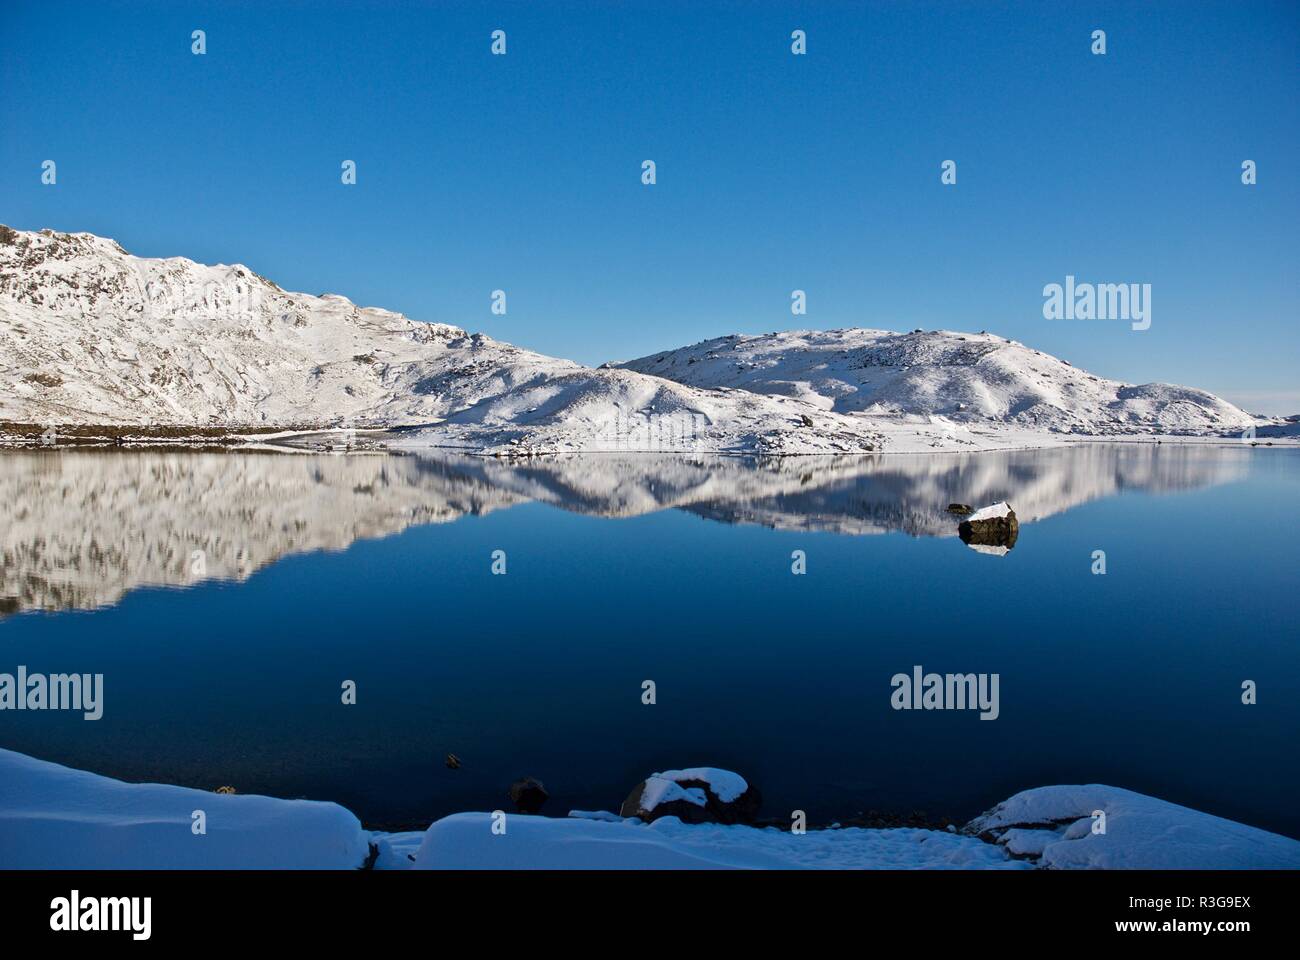 Snow covered hills reflected in a mountain lake, Mount Snowdon, Snowdonia National Park, Gwynedd, North Wales, UK Stock Photo